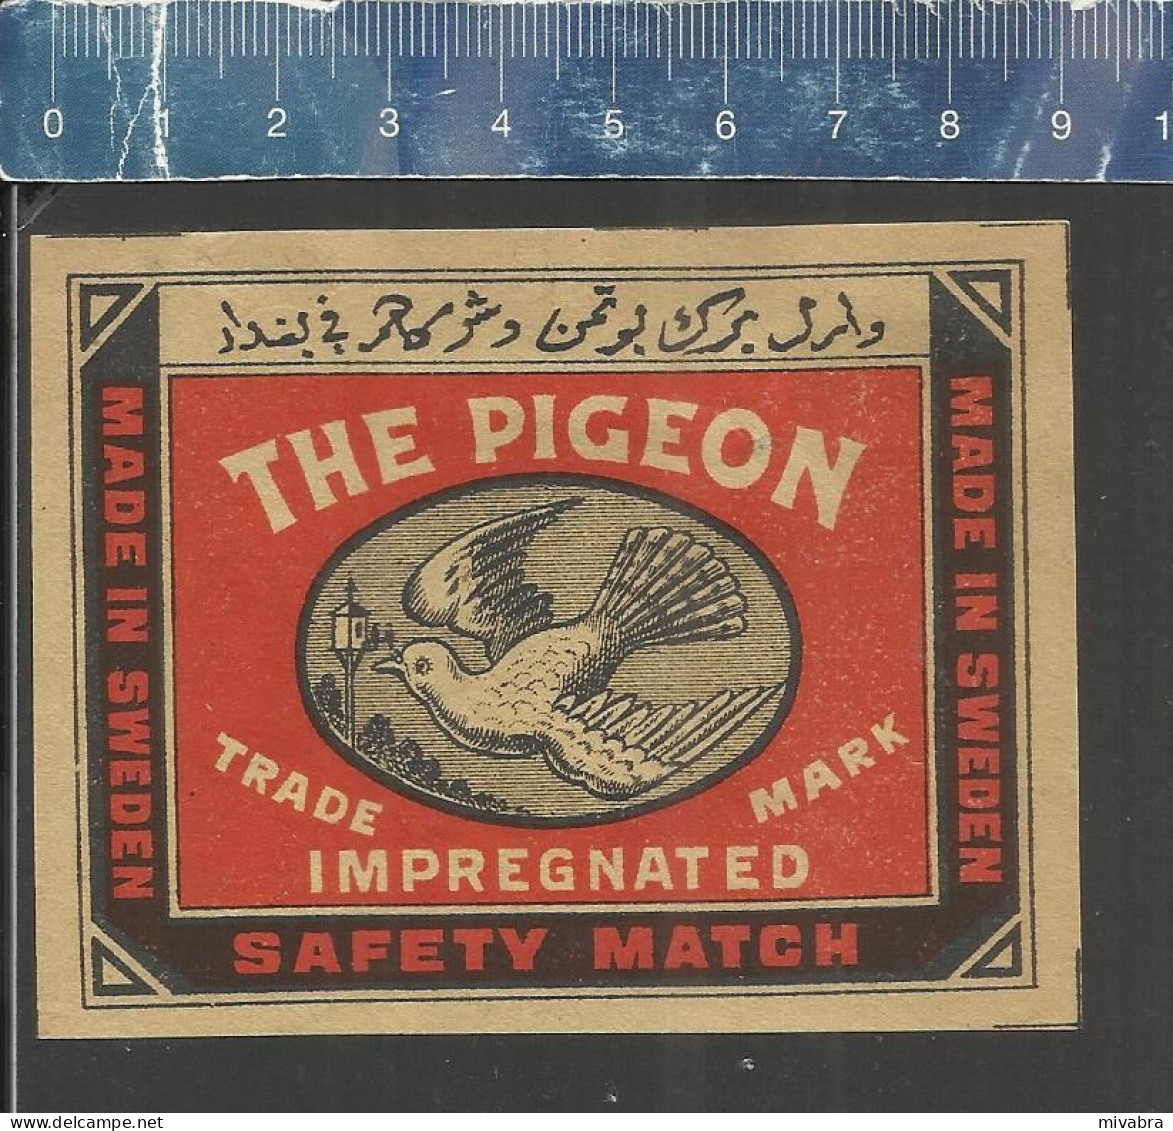 THE PIGEON  IMPREGNATED  SAFETY MATCH (PIGEONS - TAUBEN - DUIVEN PALOMA ) OLD  EXPORT MATCHBOX LABEL MADE IN SWEDEN - Matchbox Labels